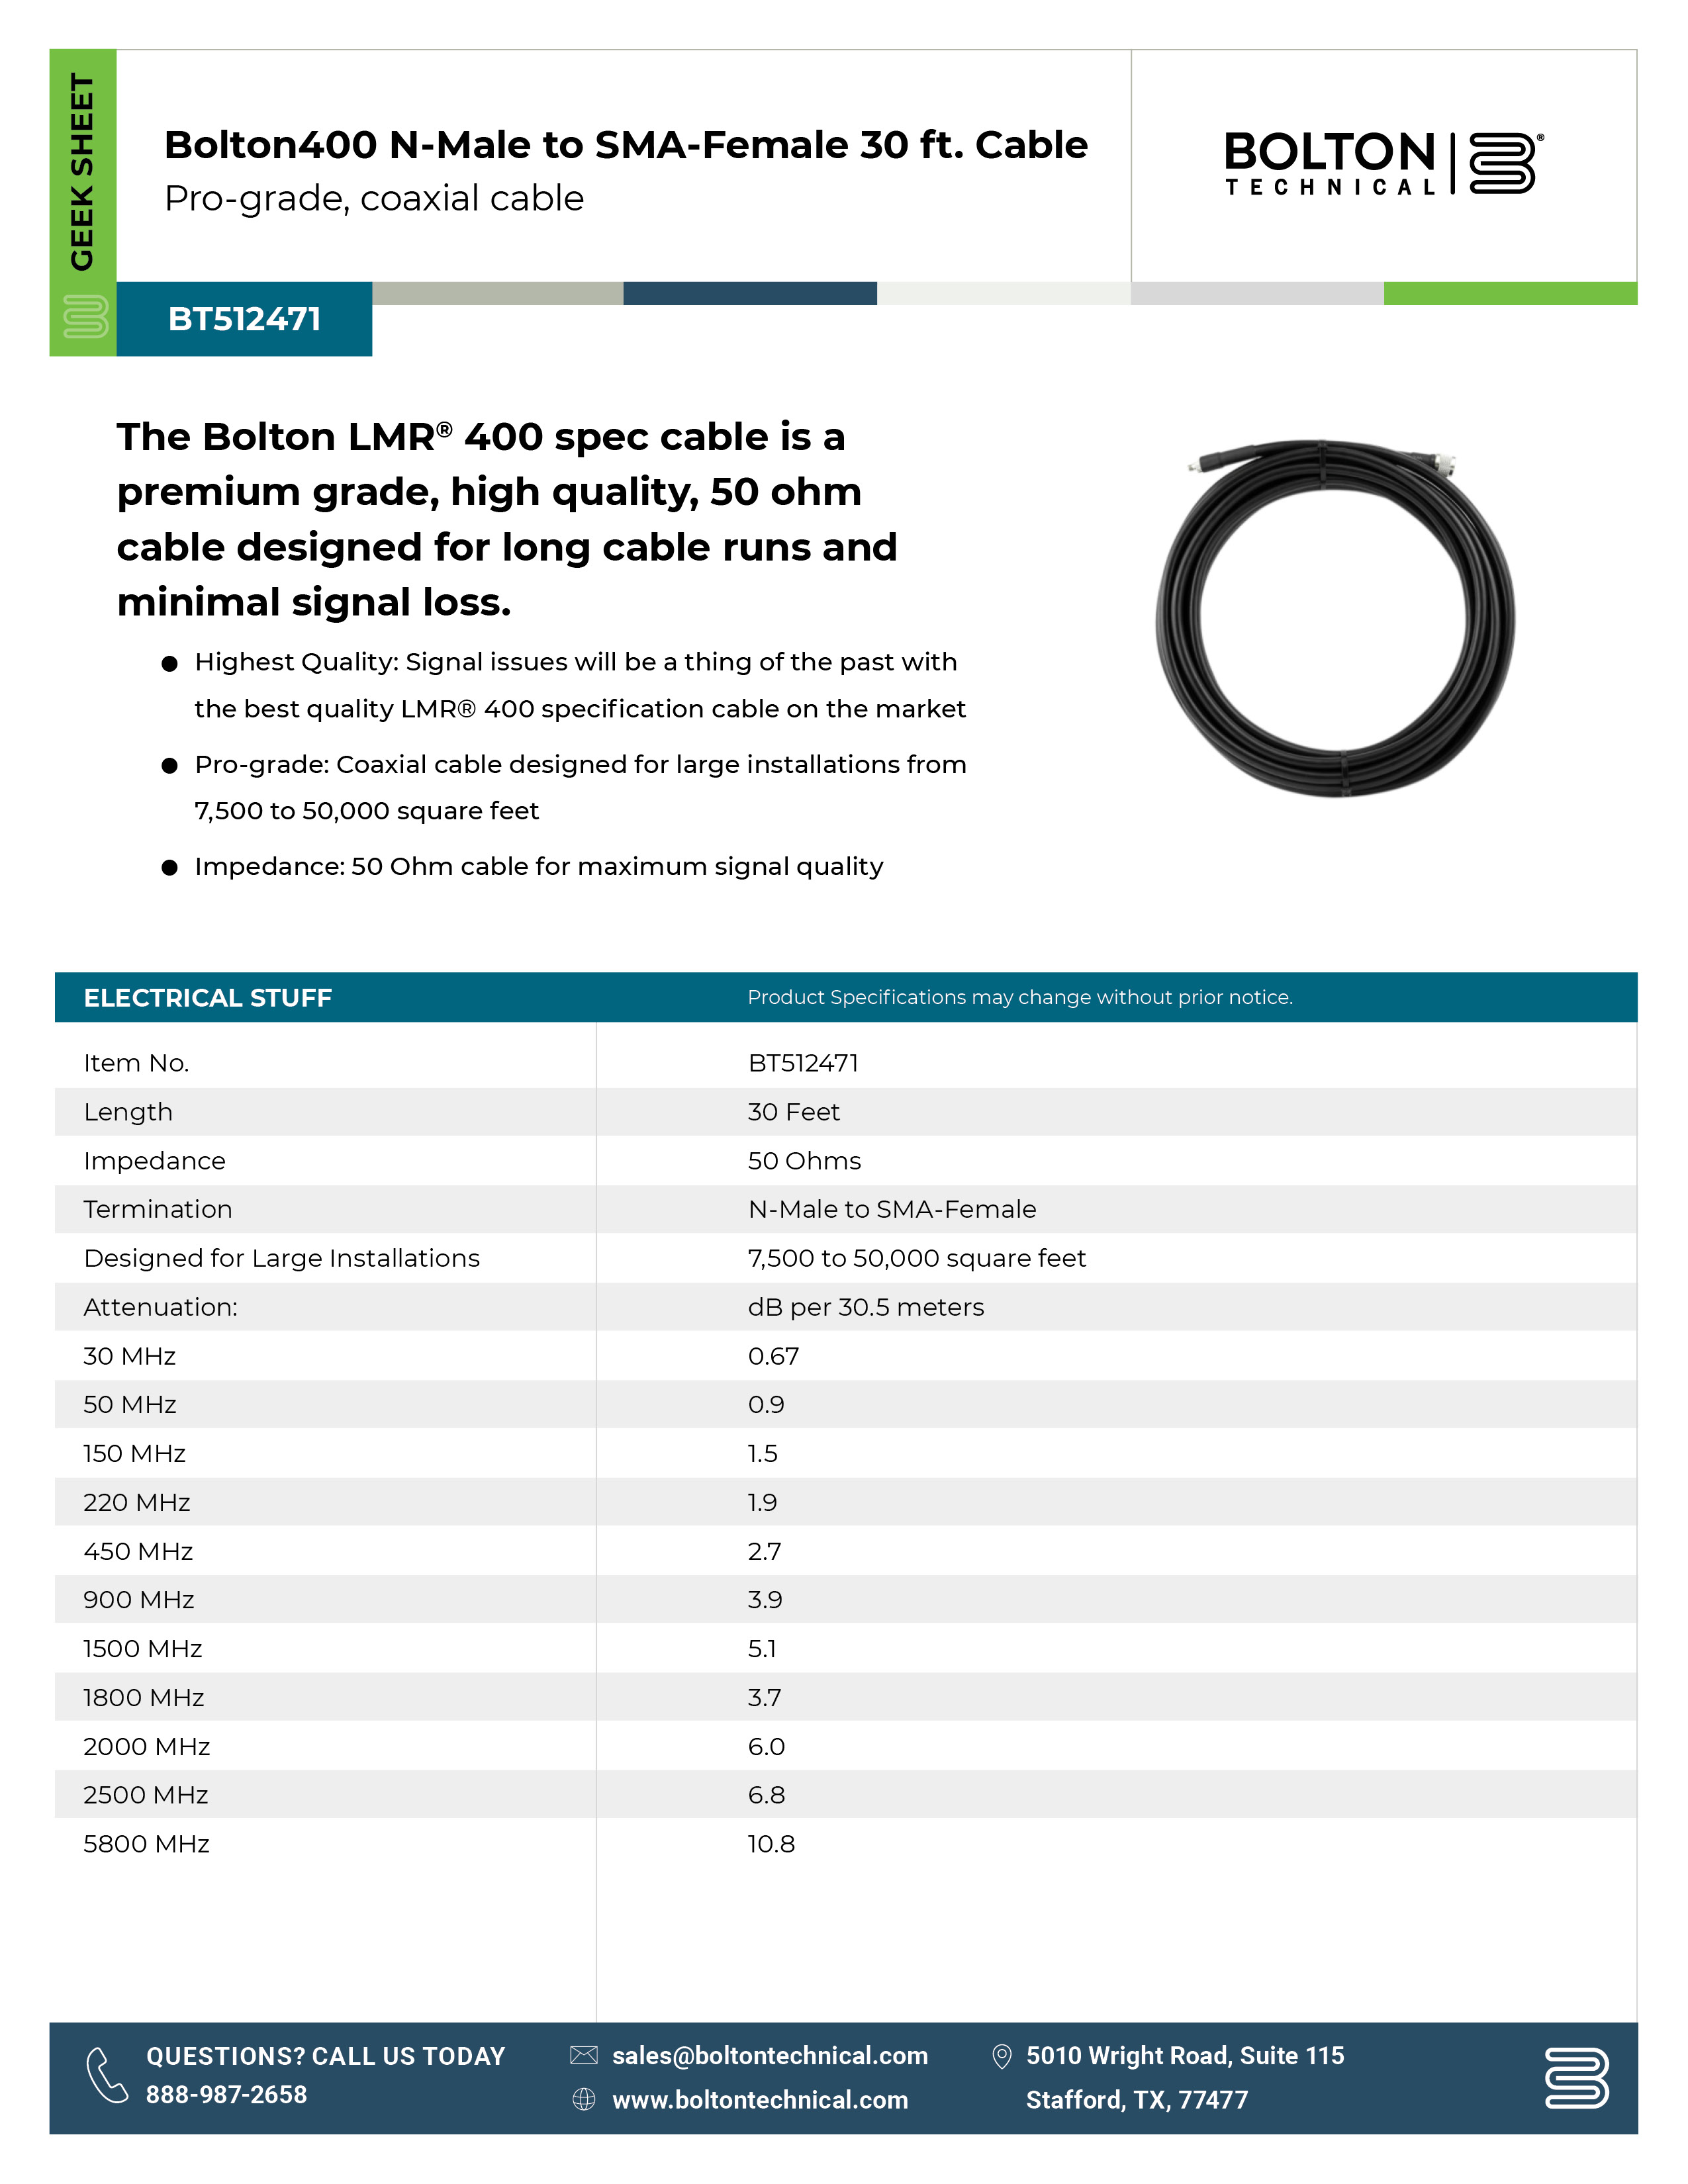 Bolton 30ft cable spec sheet